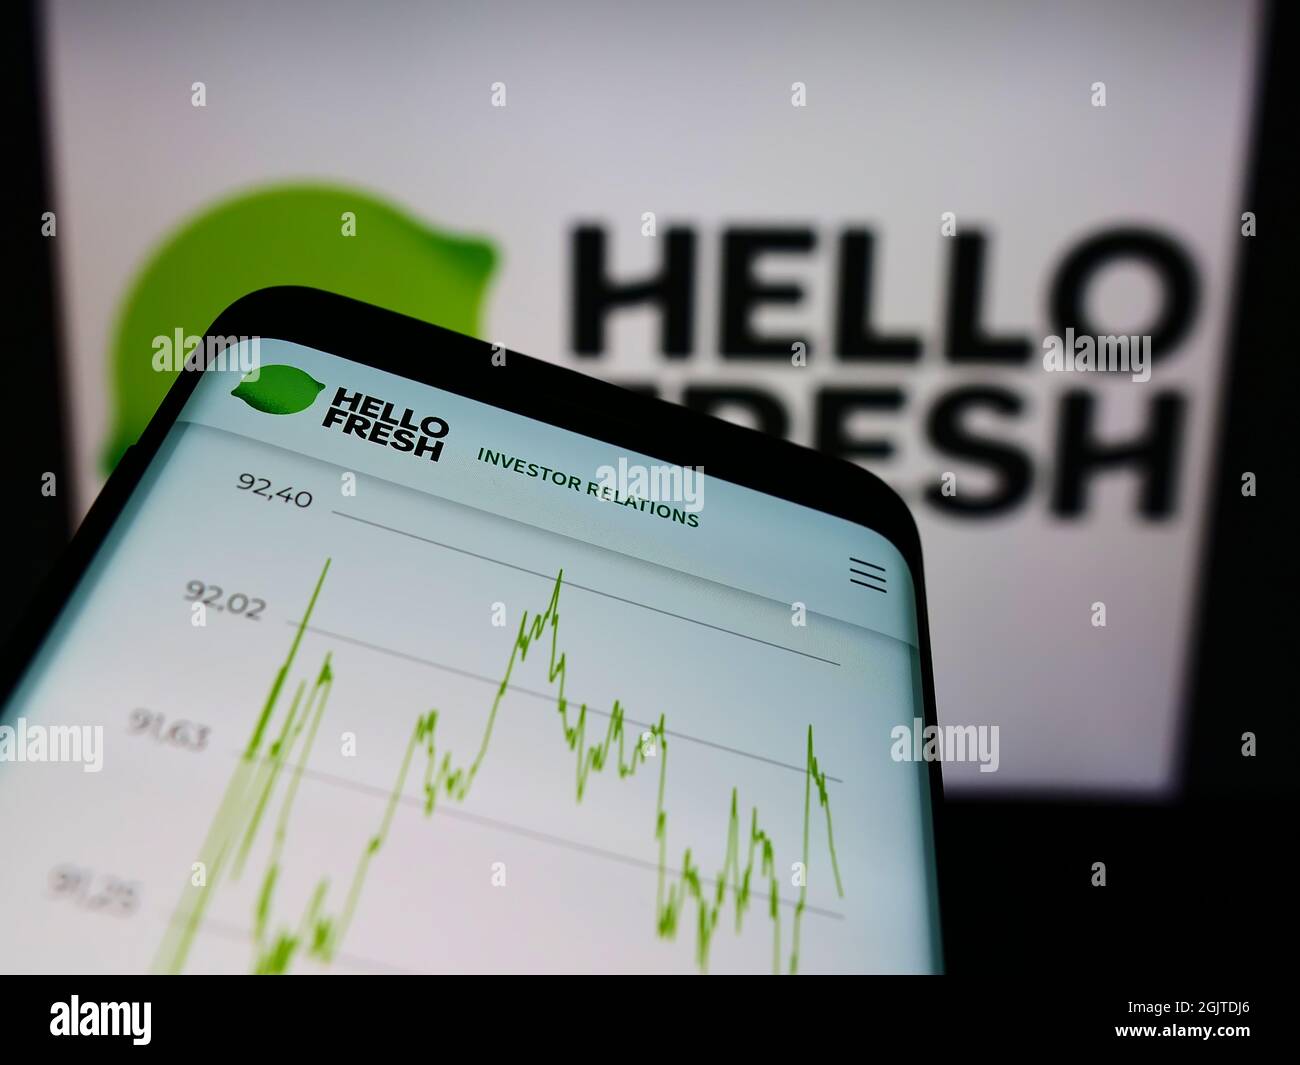 Cellphone with web page of German meal-kit company HelloFresh SE on screen in front of business logo. Focus on top-left of phone display. Stock Photo